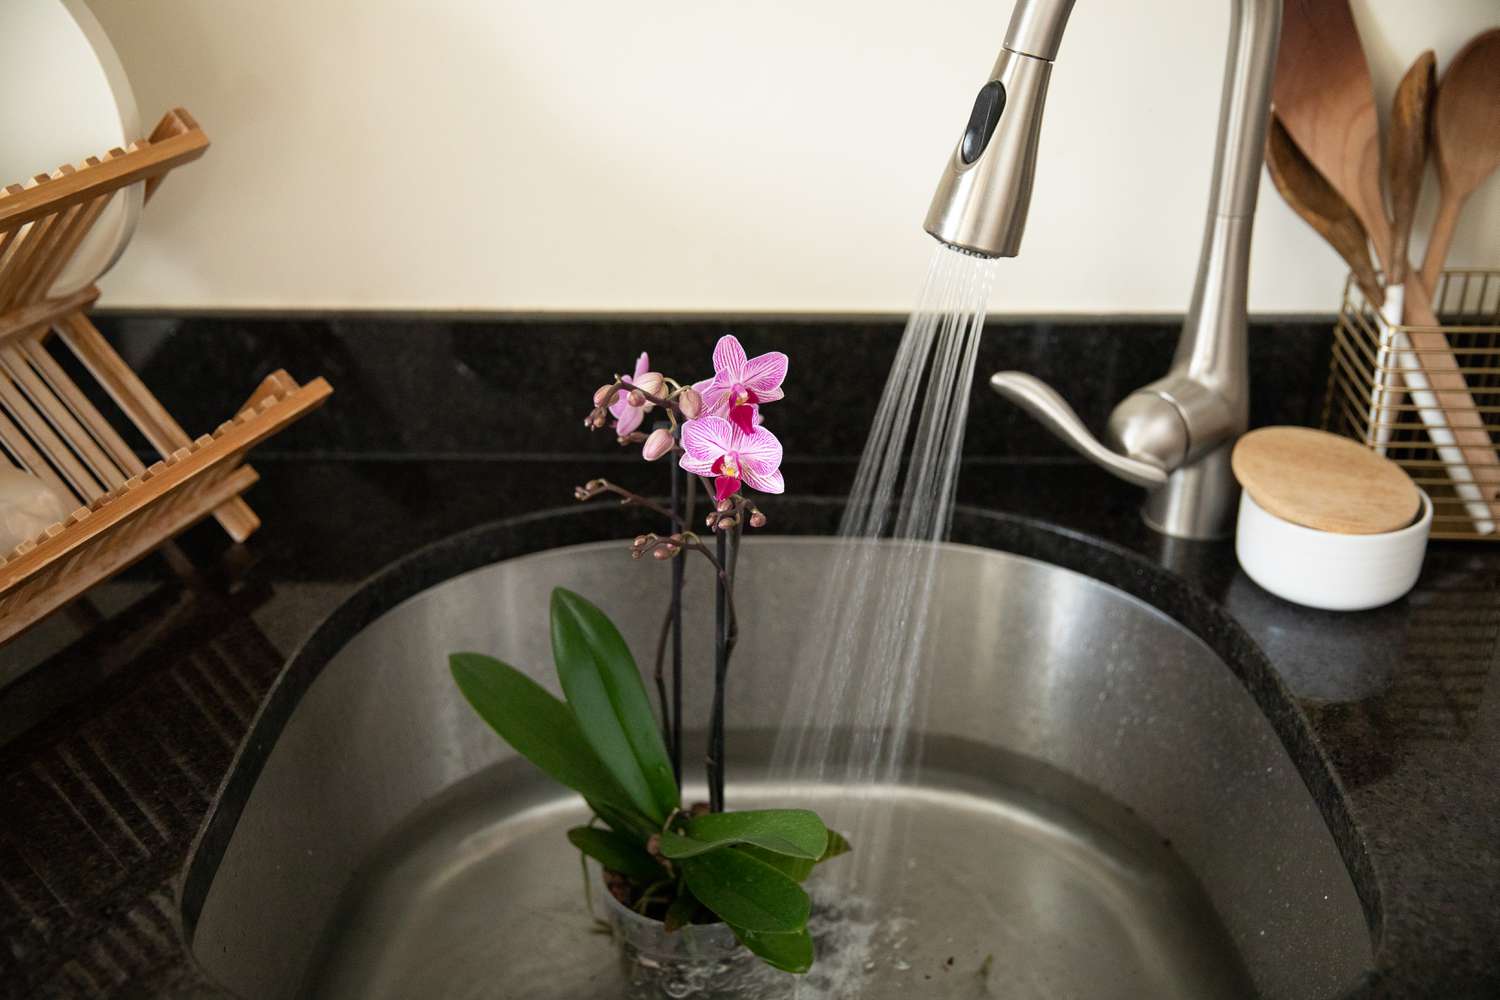 watering an orchid in the sink